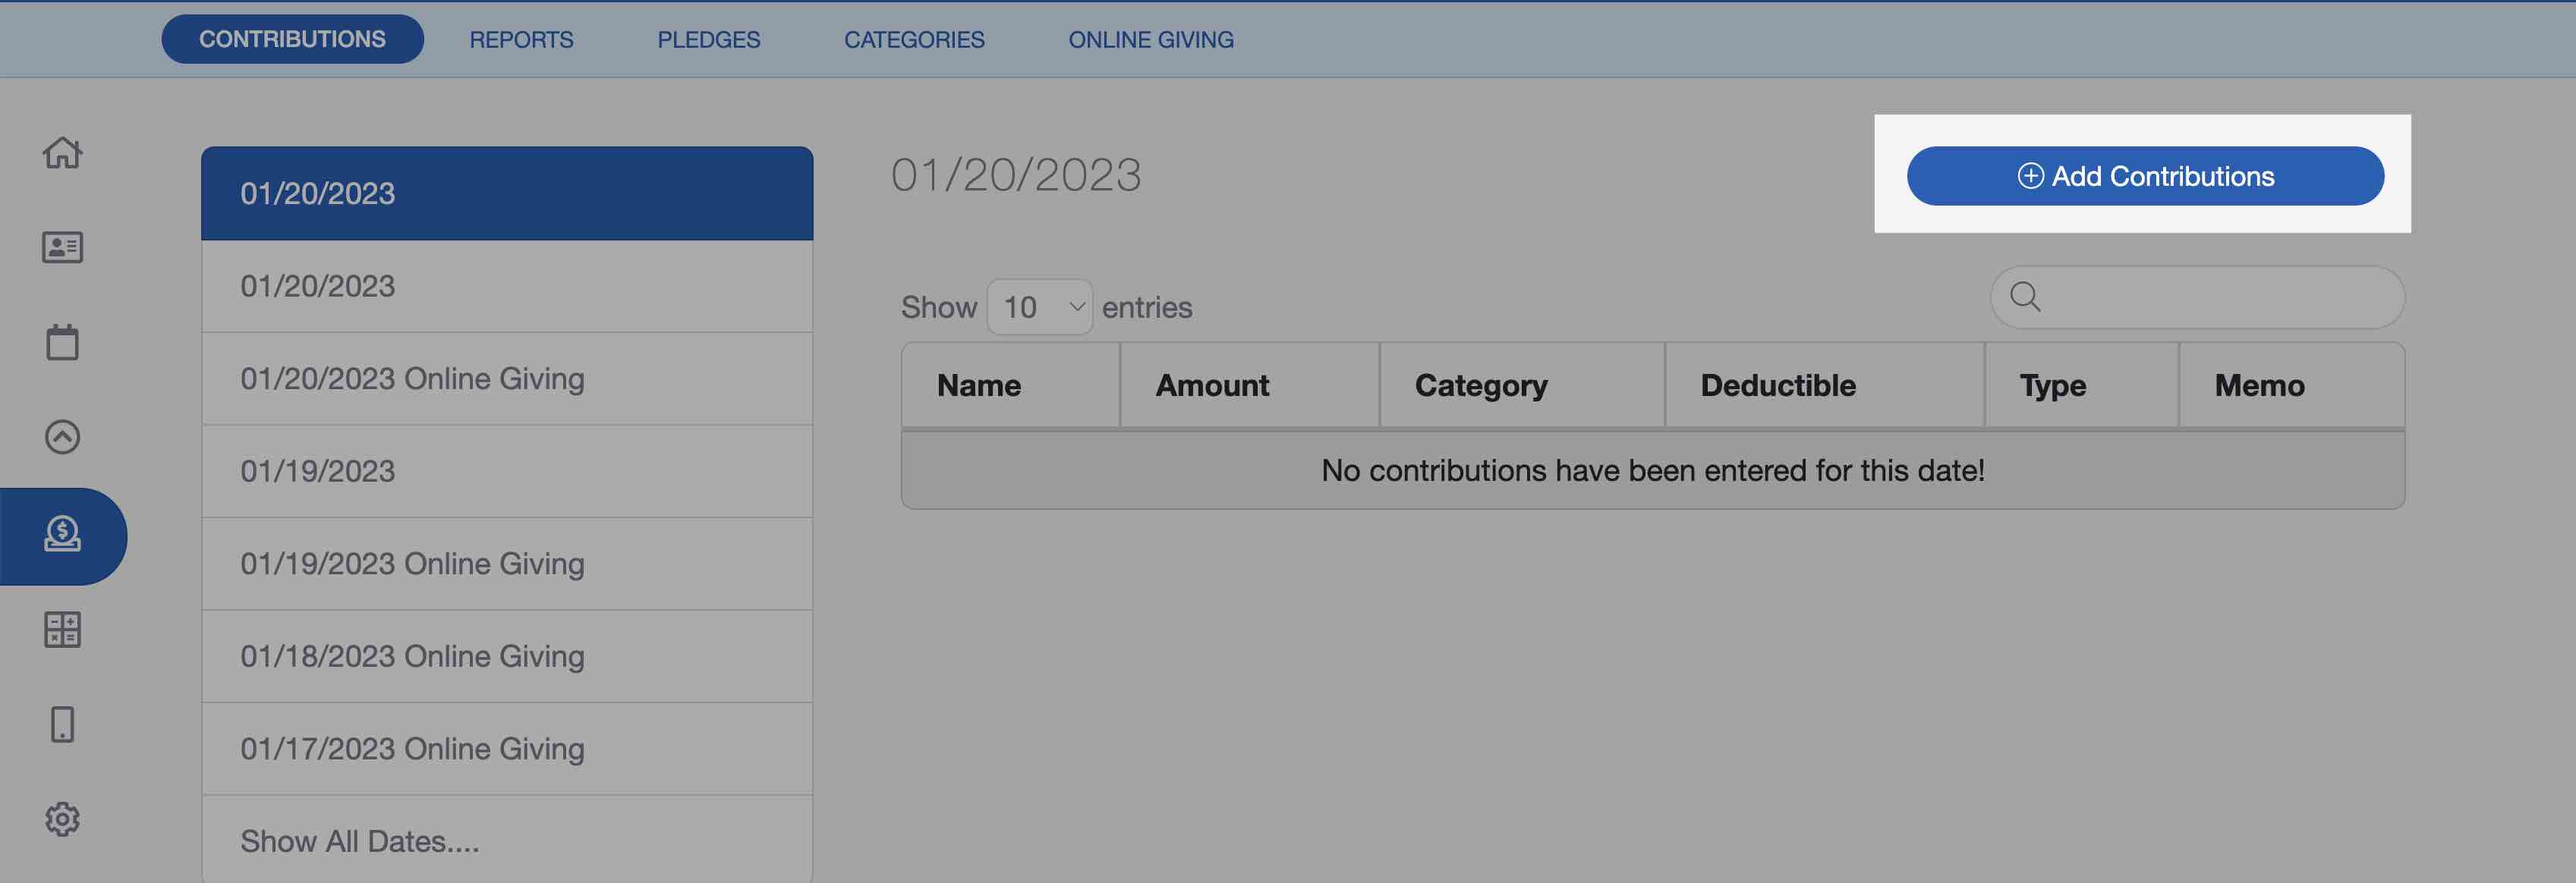 Adding giving dates in the church contribution tracking software.